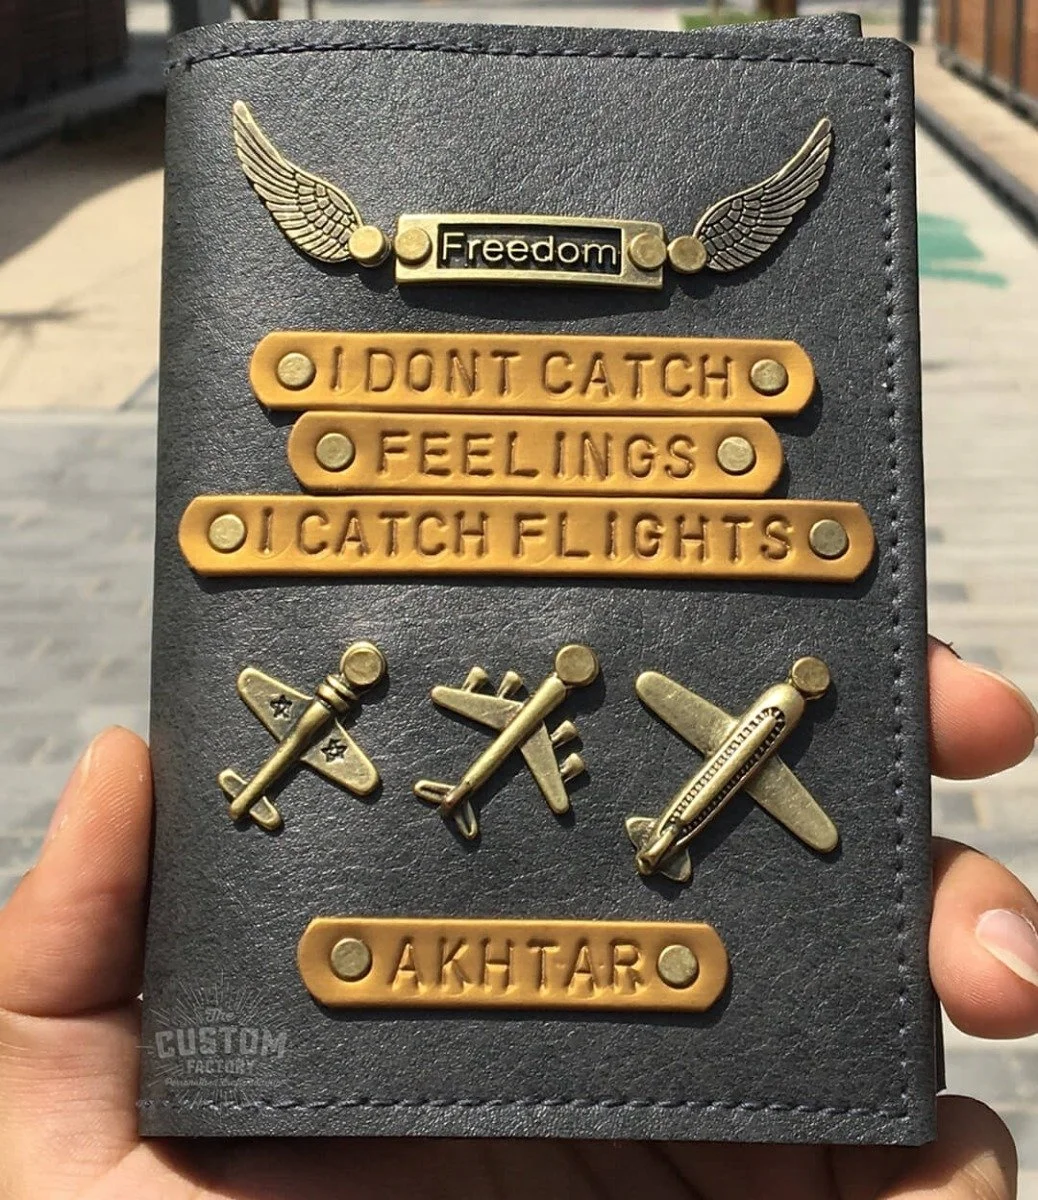 Feeling Customized Passport Cover by Custom Factory